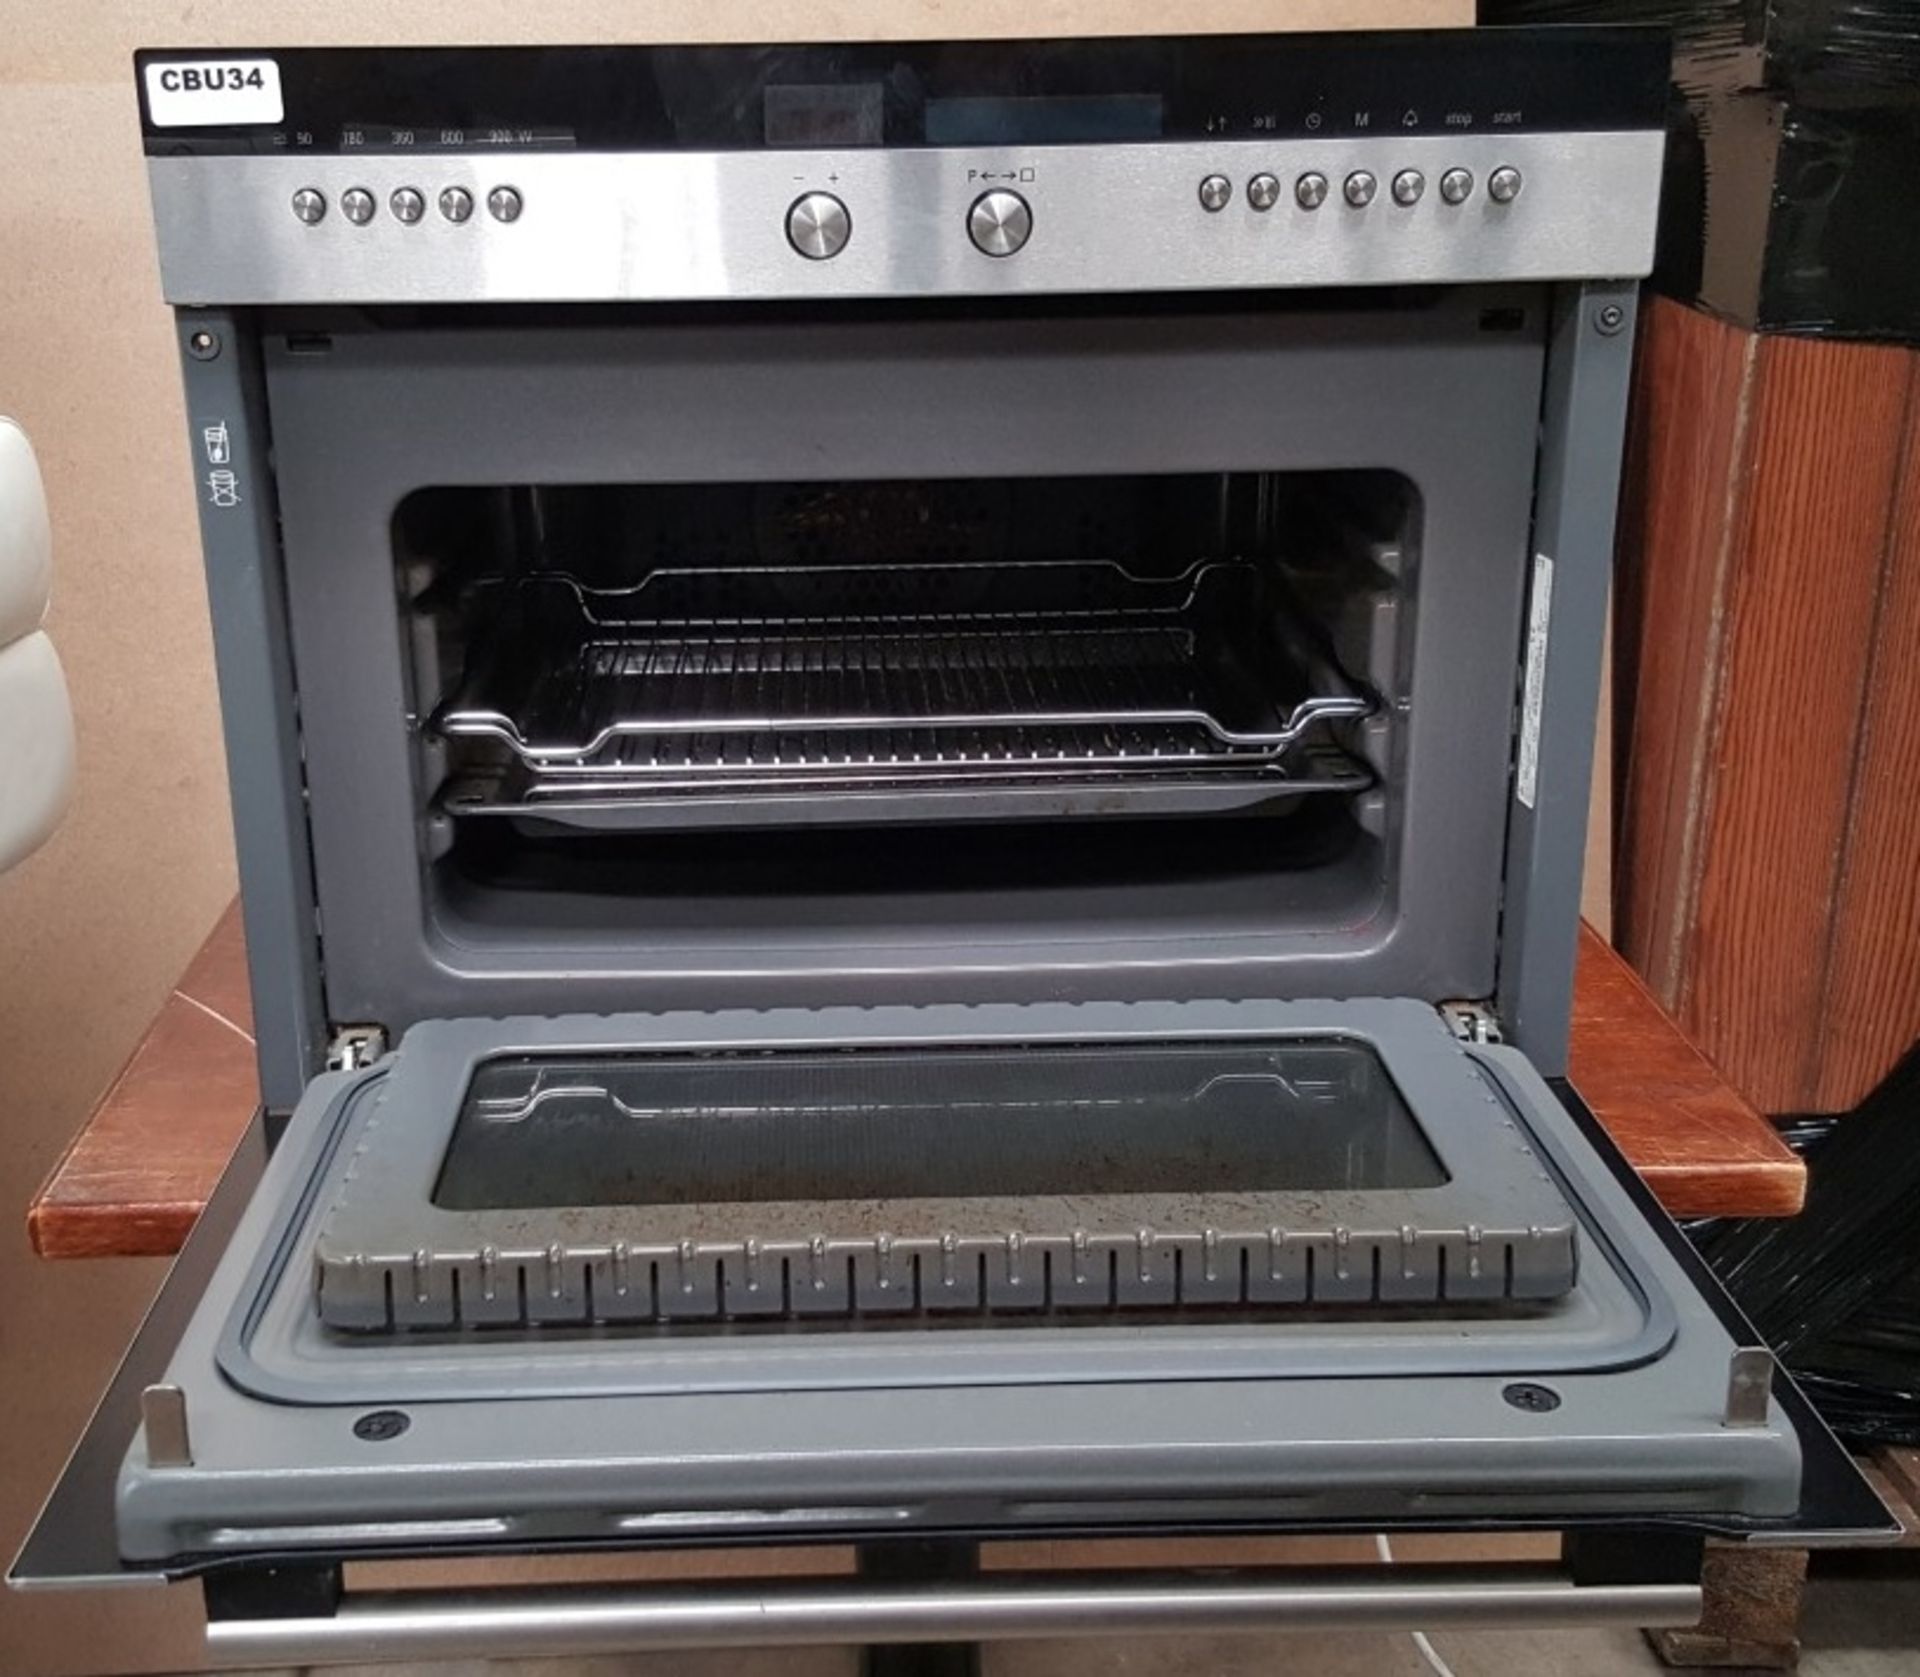 1 x Siemens HB86K570B Compact Combination Oven with Microwave - Ref CBU34 - NO VAT ON HAMMER - Image 3 of 6